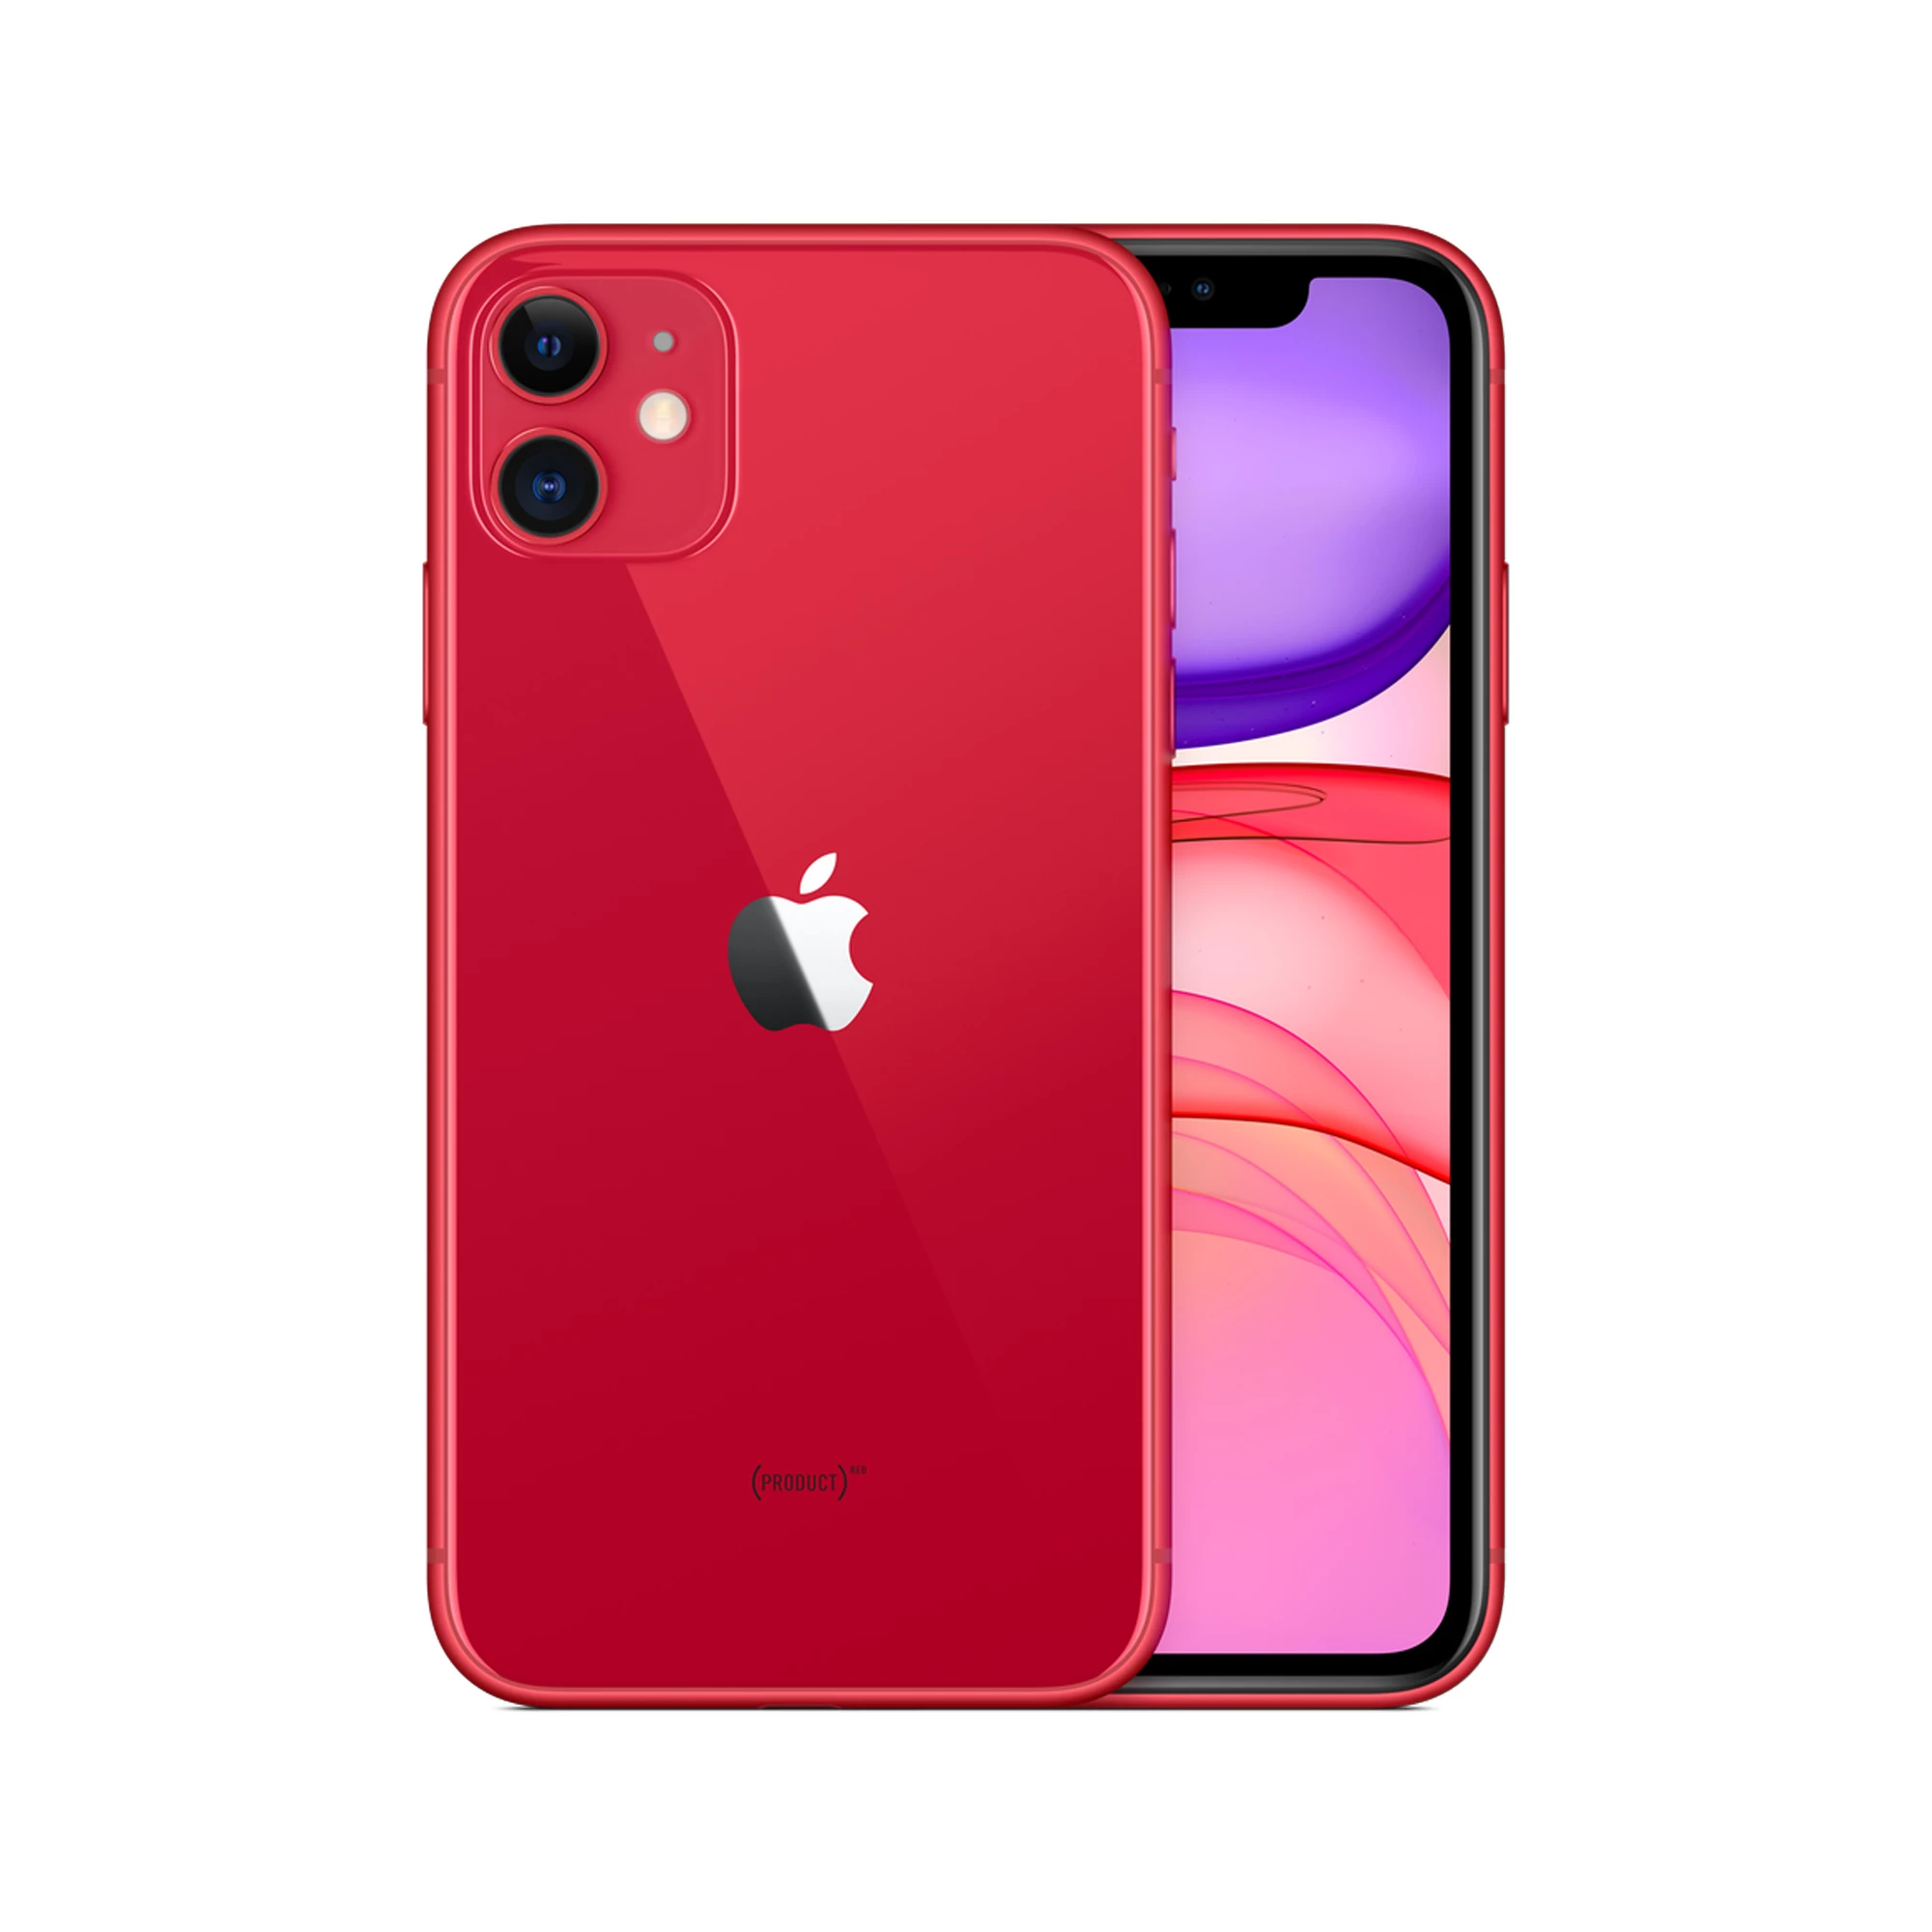 Apple iPhone 11 64GB Product (RED) (MWL92) Full Box